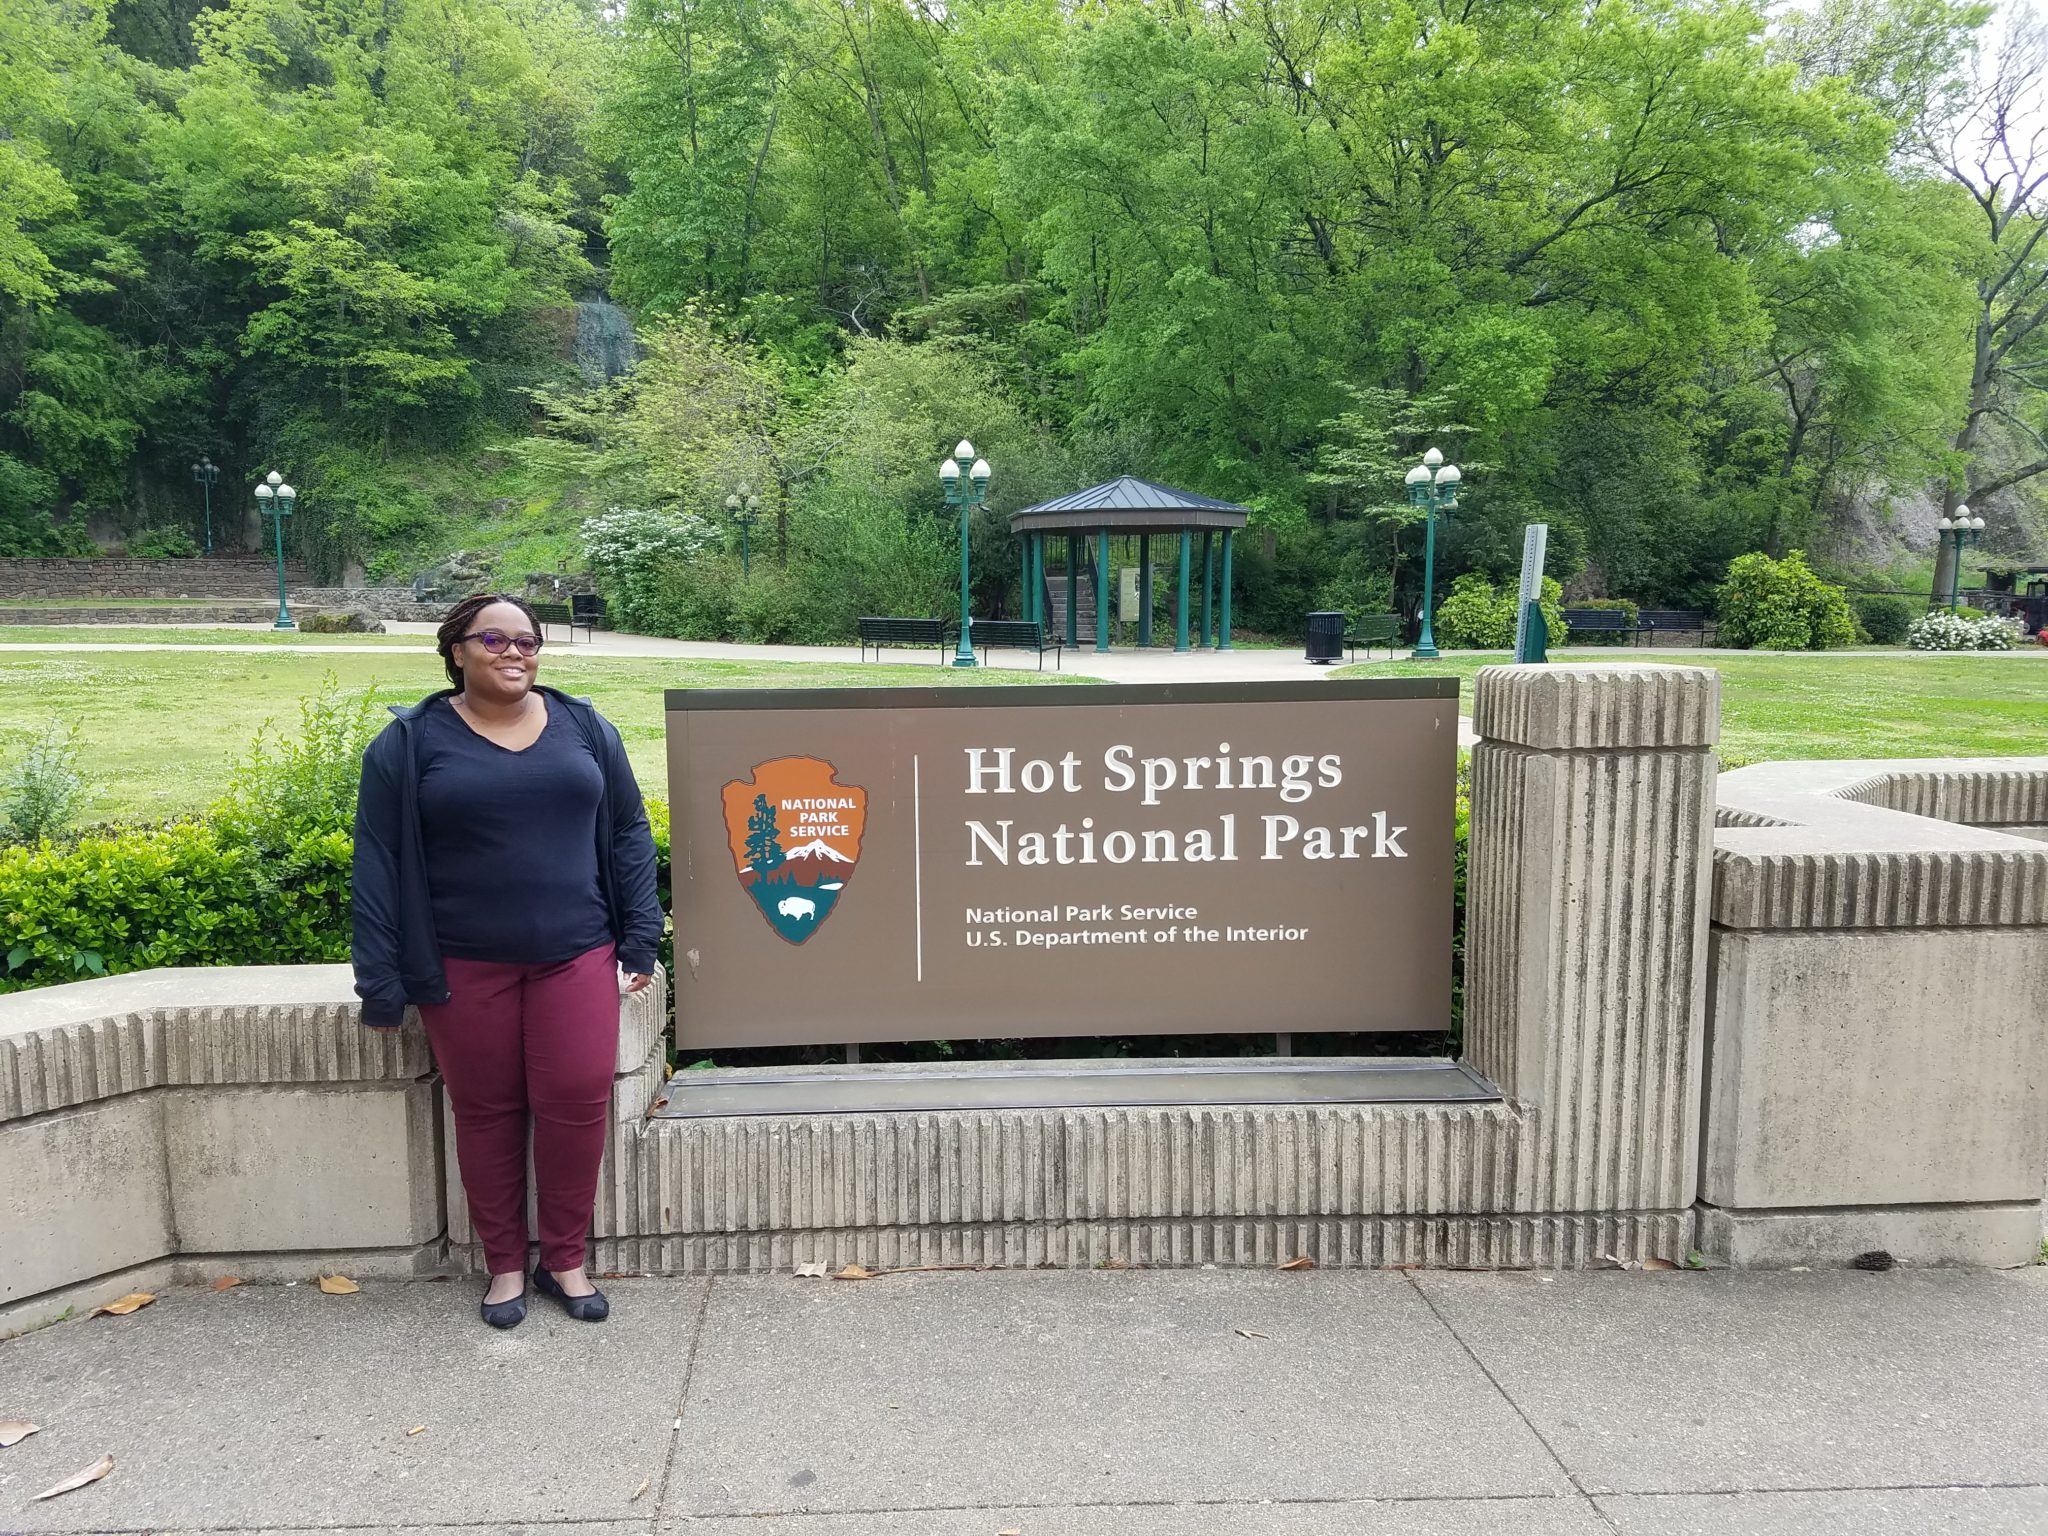 Hot Springs National Park sign photo